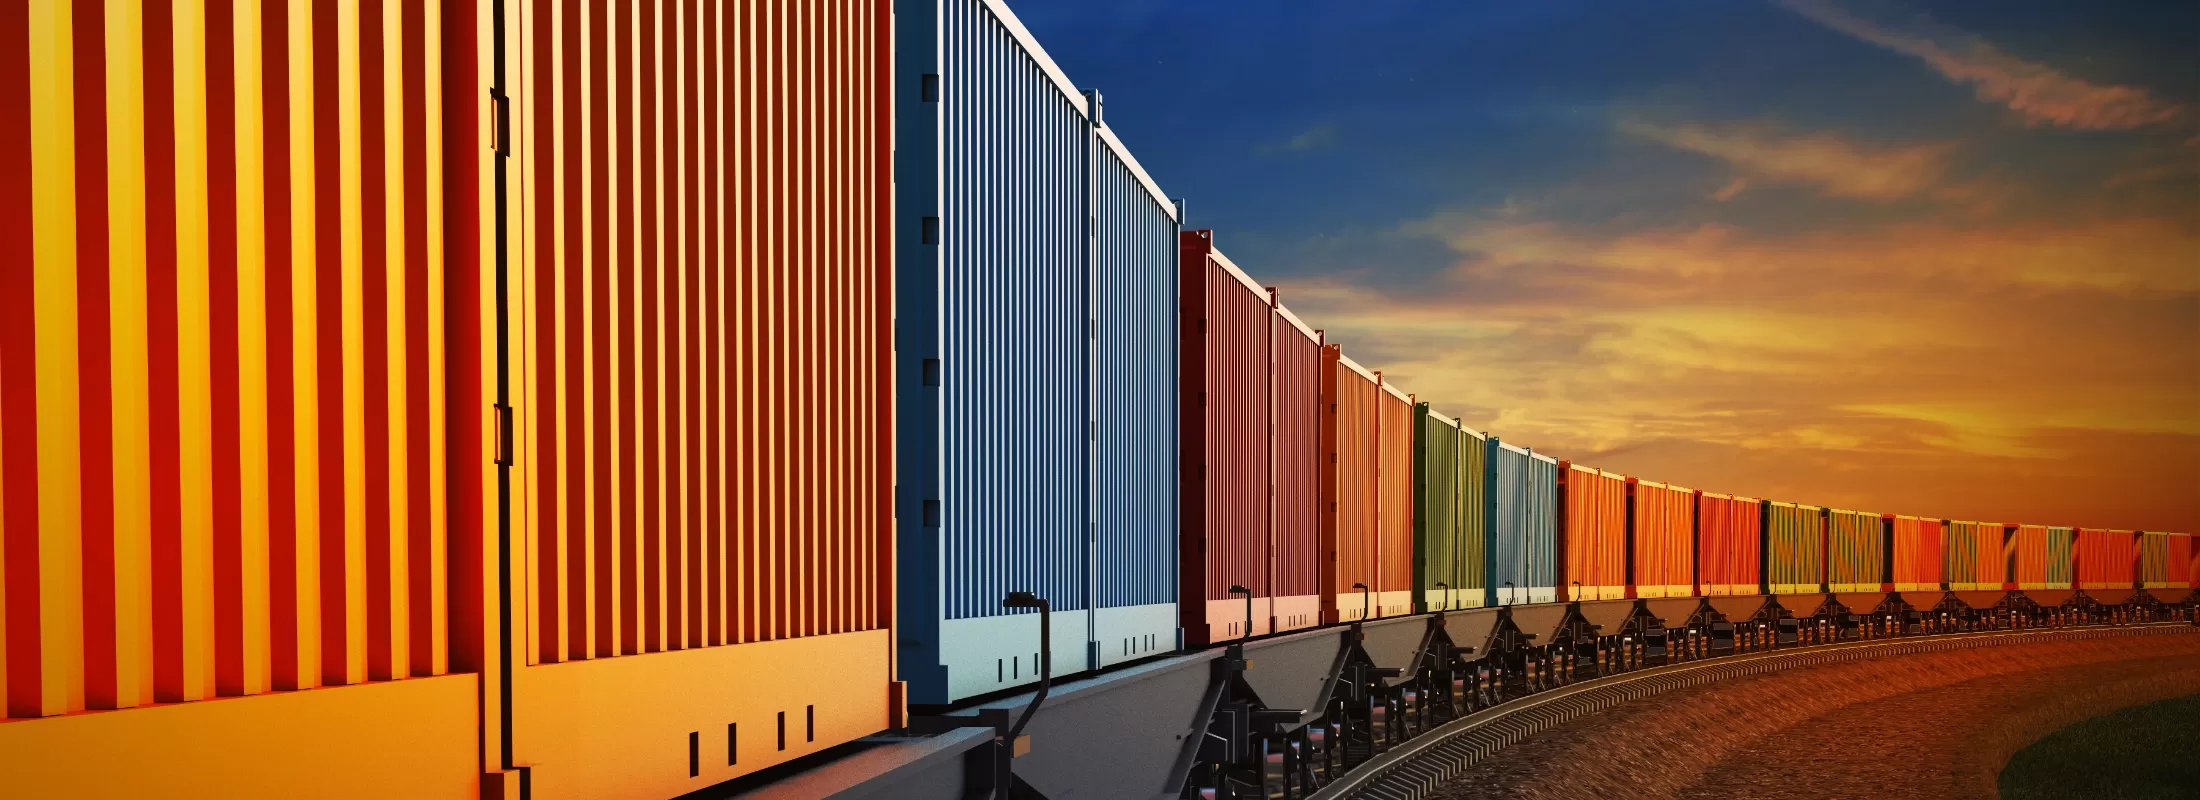 Multi coloured freight train containers on train